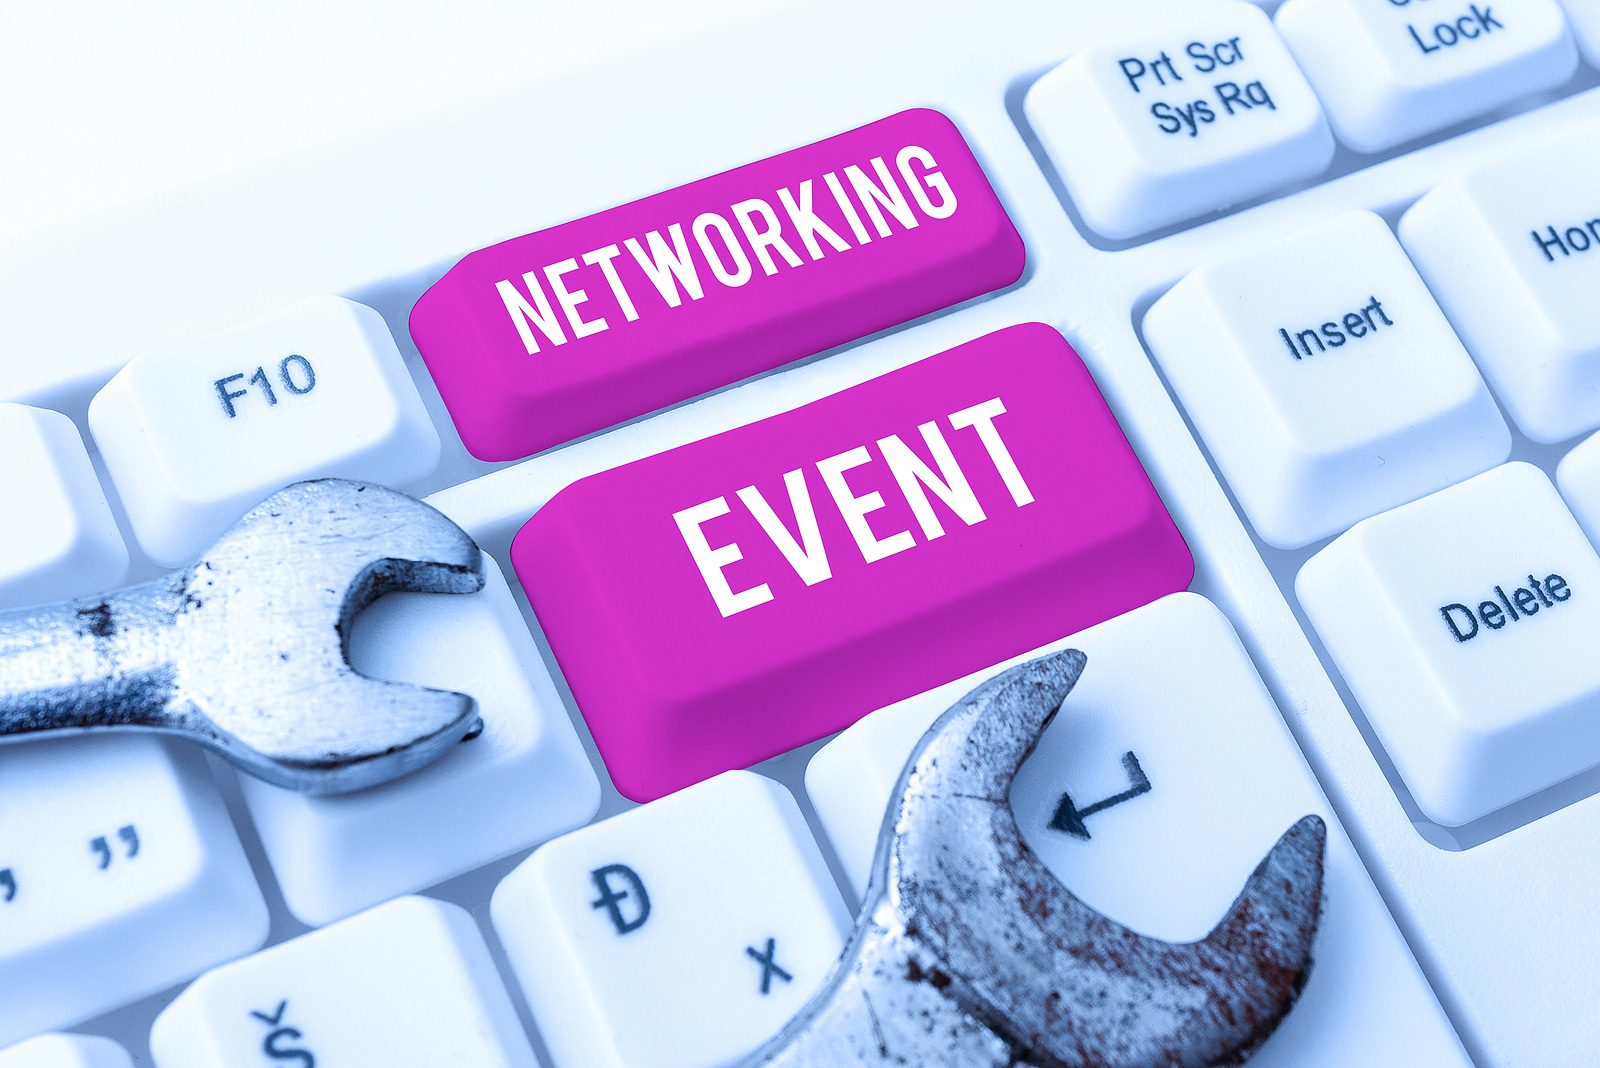 Networking Event at Siline’s Restaurant – Ballwin